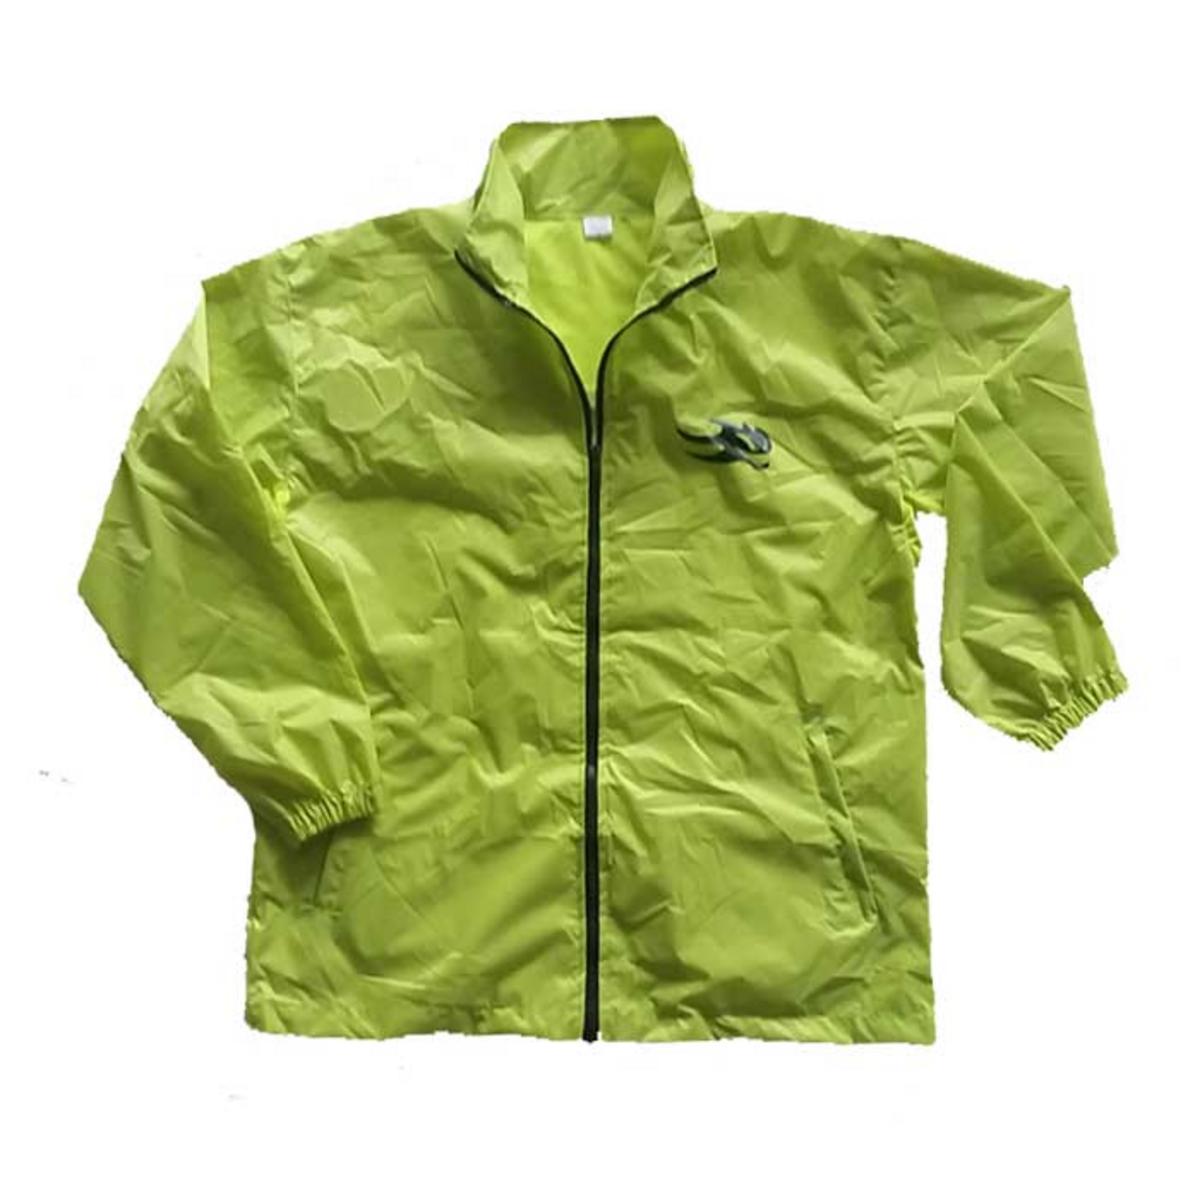 Unisex Rain Jacket with Storage Pouch by Winning Beast®. Neon Yellow. 2 Extra Large. - image 1 of 4